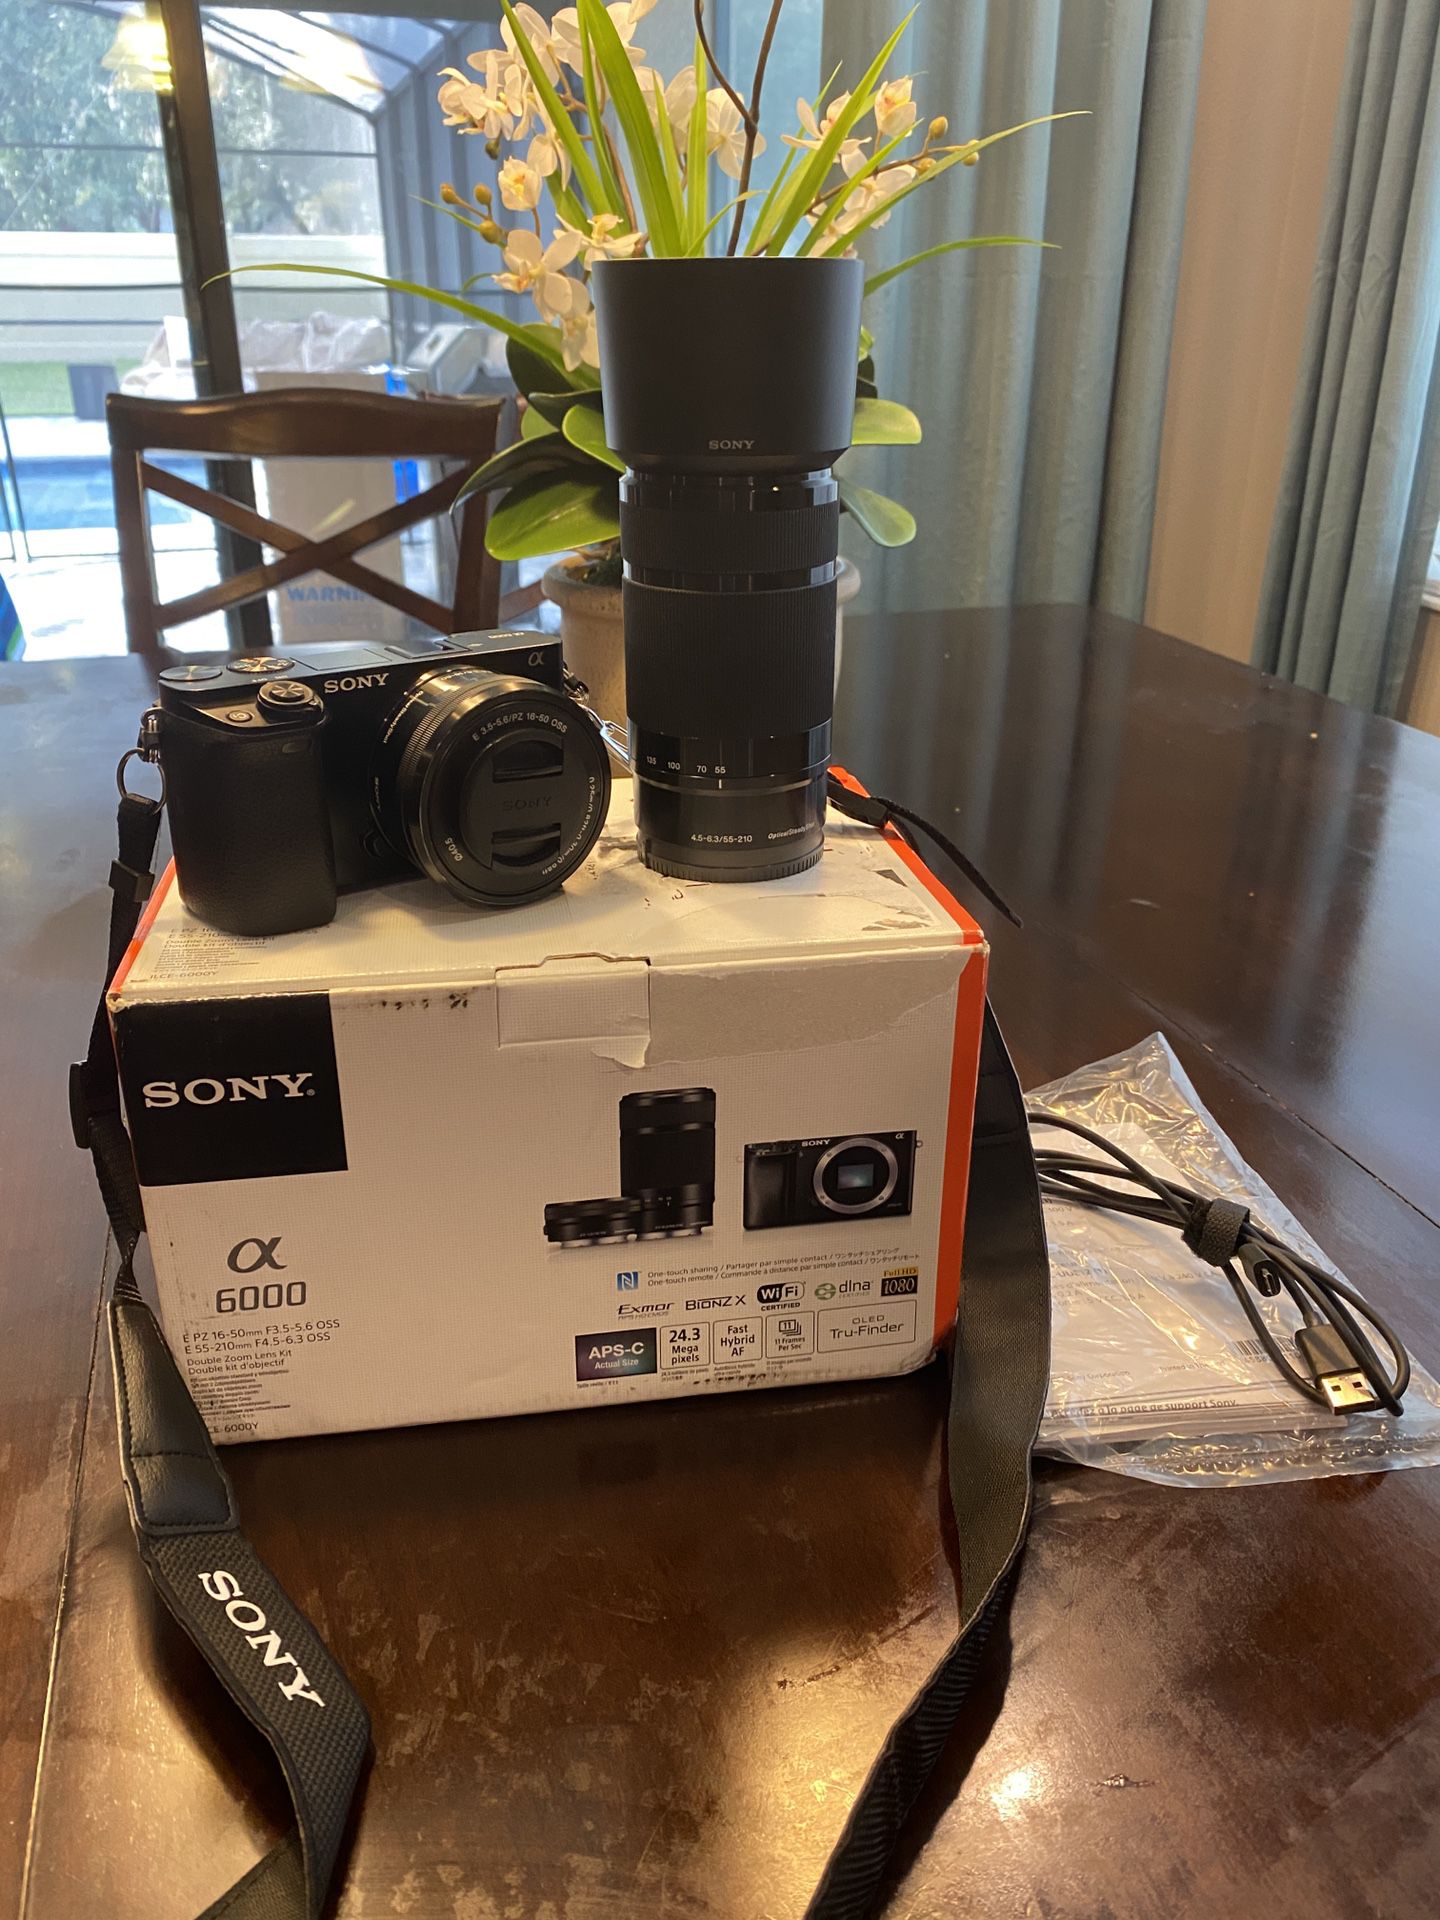 Sony A6000 w/16-50mm and 55-210mm lenses